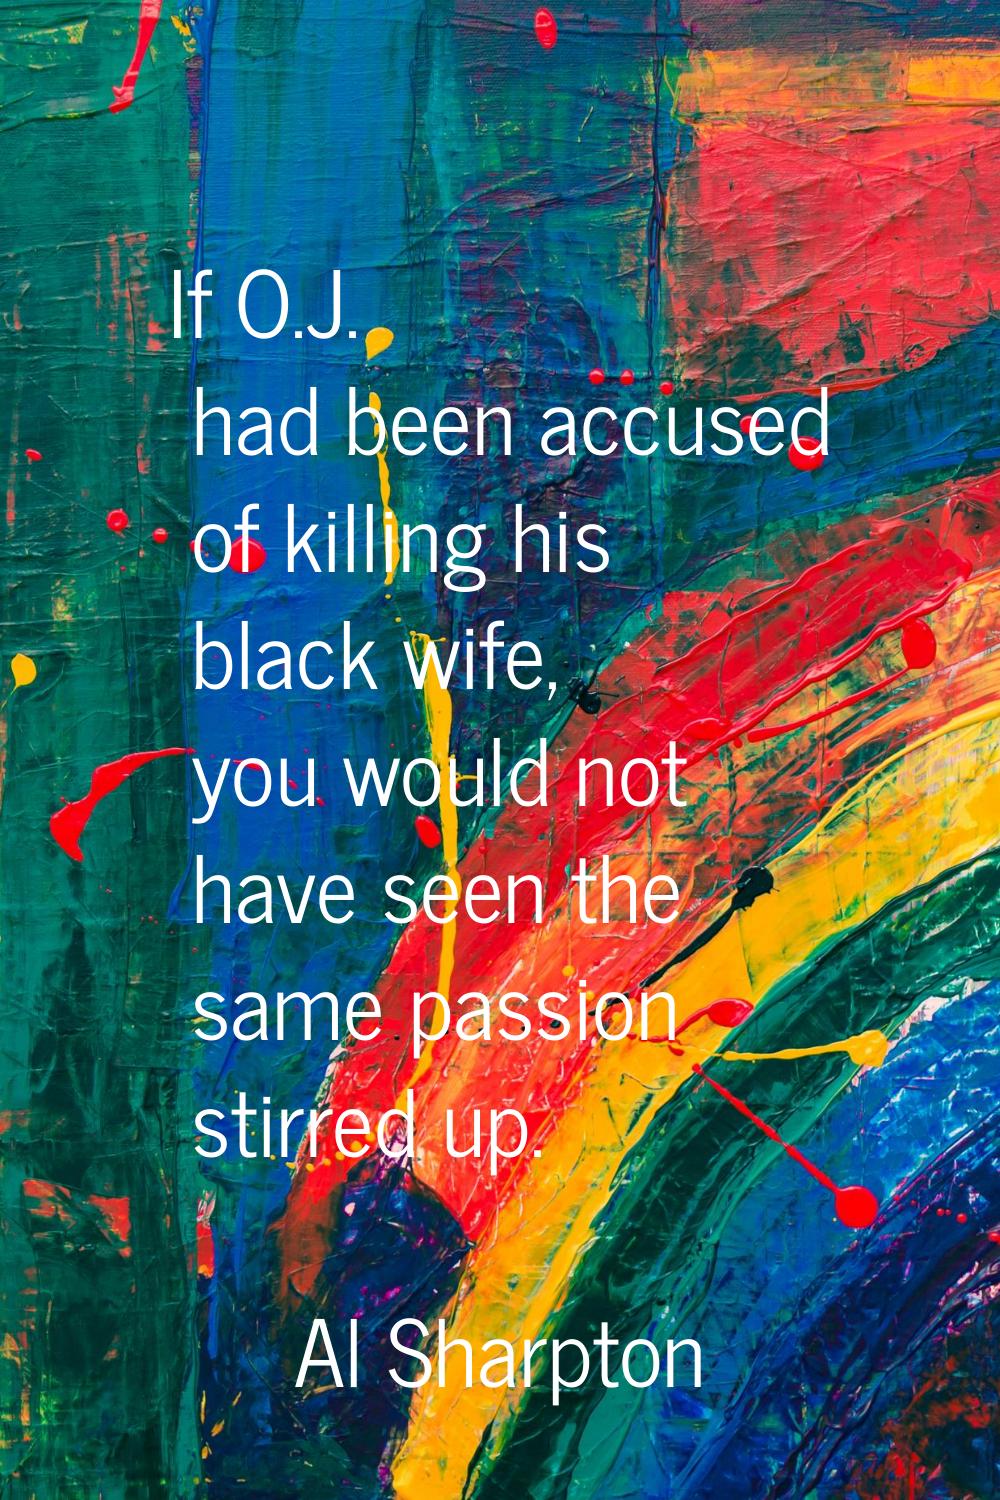 If O.J. had been accused of killing his black wife, you would not have seen the same passion stirre